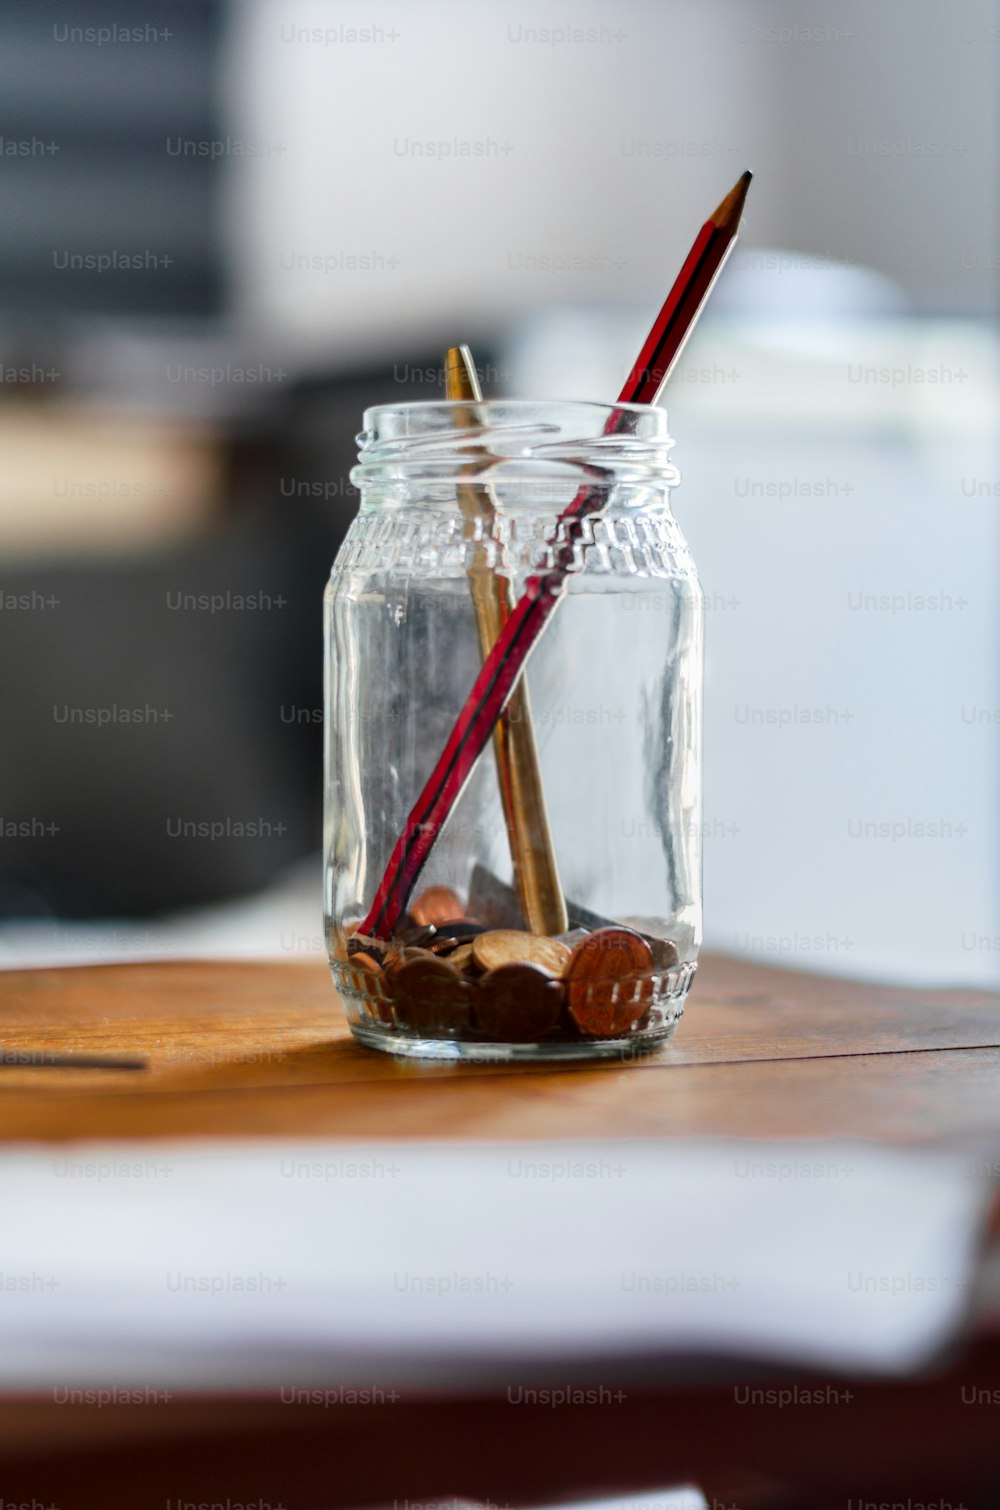 a glass jar with two red straws and a wooden spoon